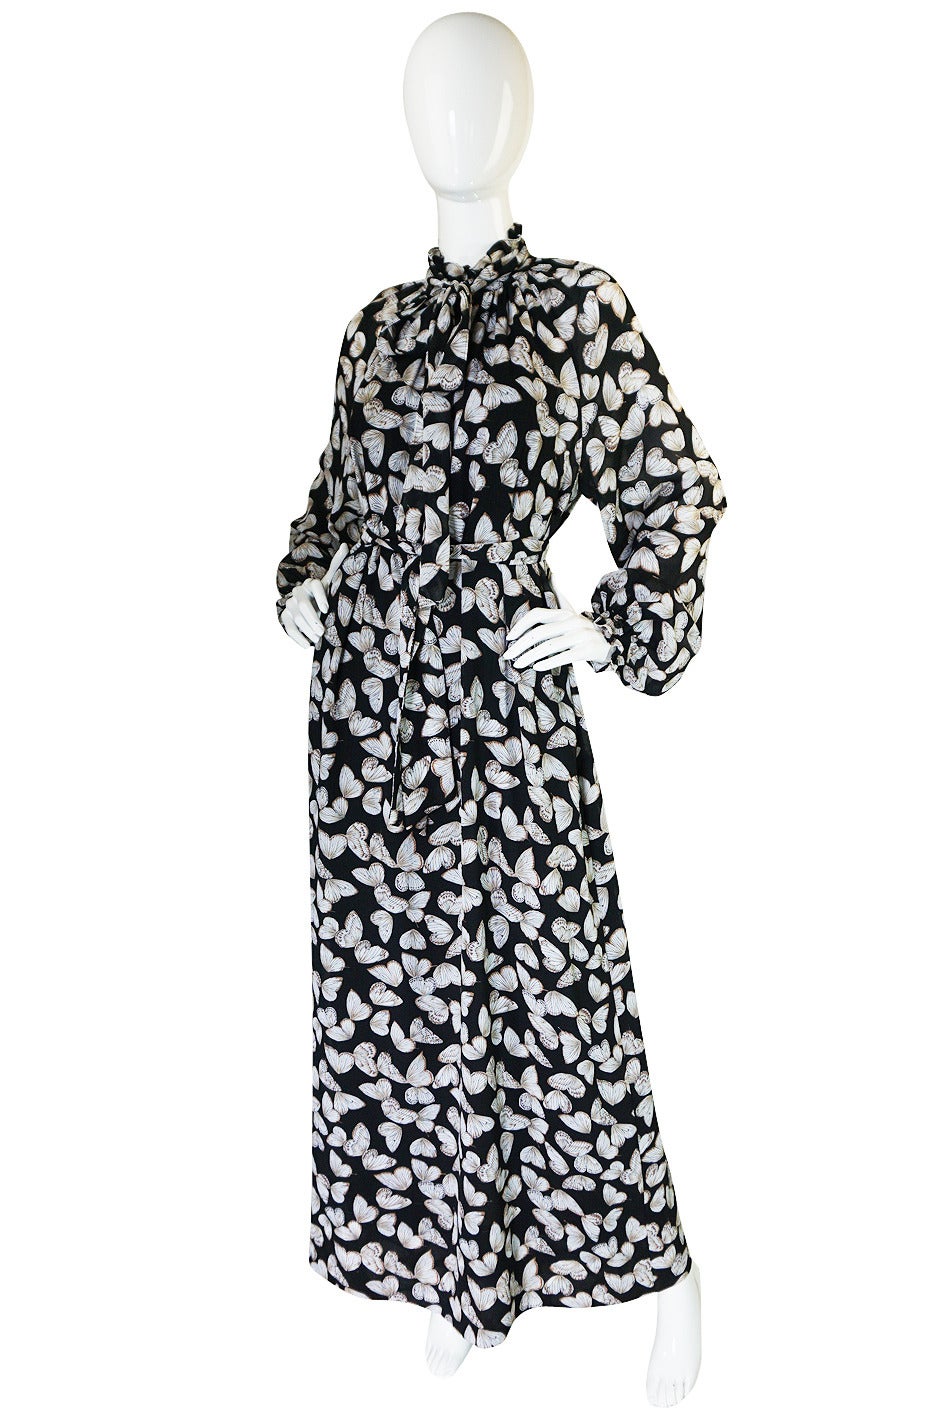 I love this fabulous late 1970s Hanae Mori caftan dress with its butterfly design covering the entire surface. It is made of a feather light silk crepe that really hold the colors beautifully. The gown is cut super model long and is constructed of